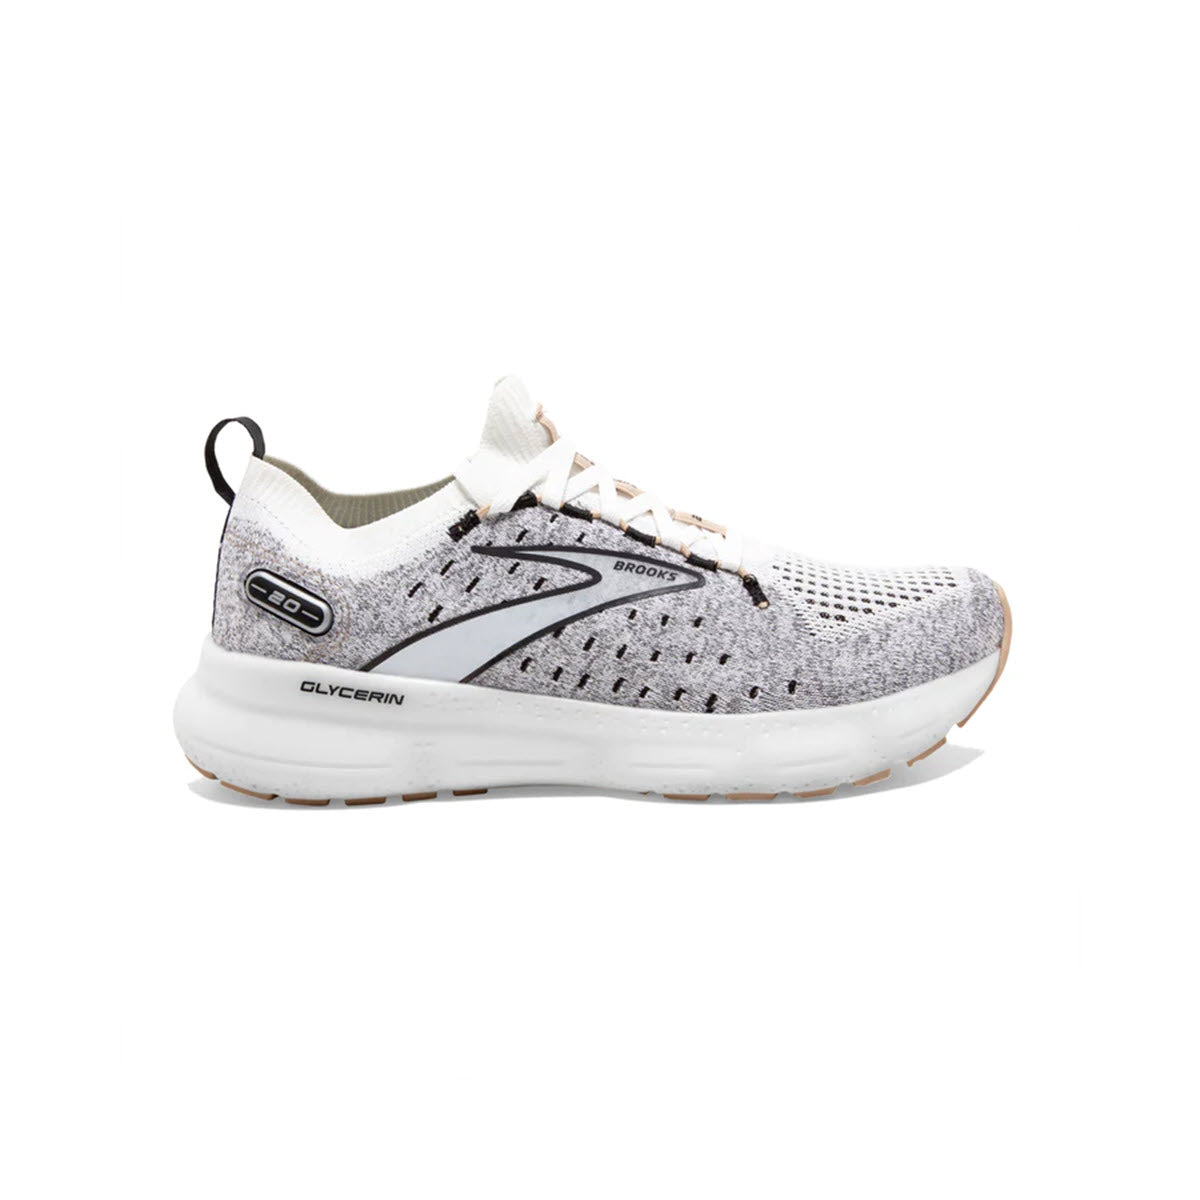 A single gray and white cushioned Brooks Glycerin StealthFit 20 running shoe with the brand logo visible on the side.